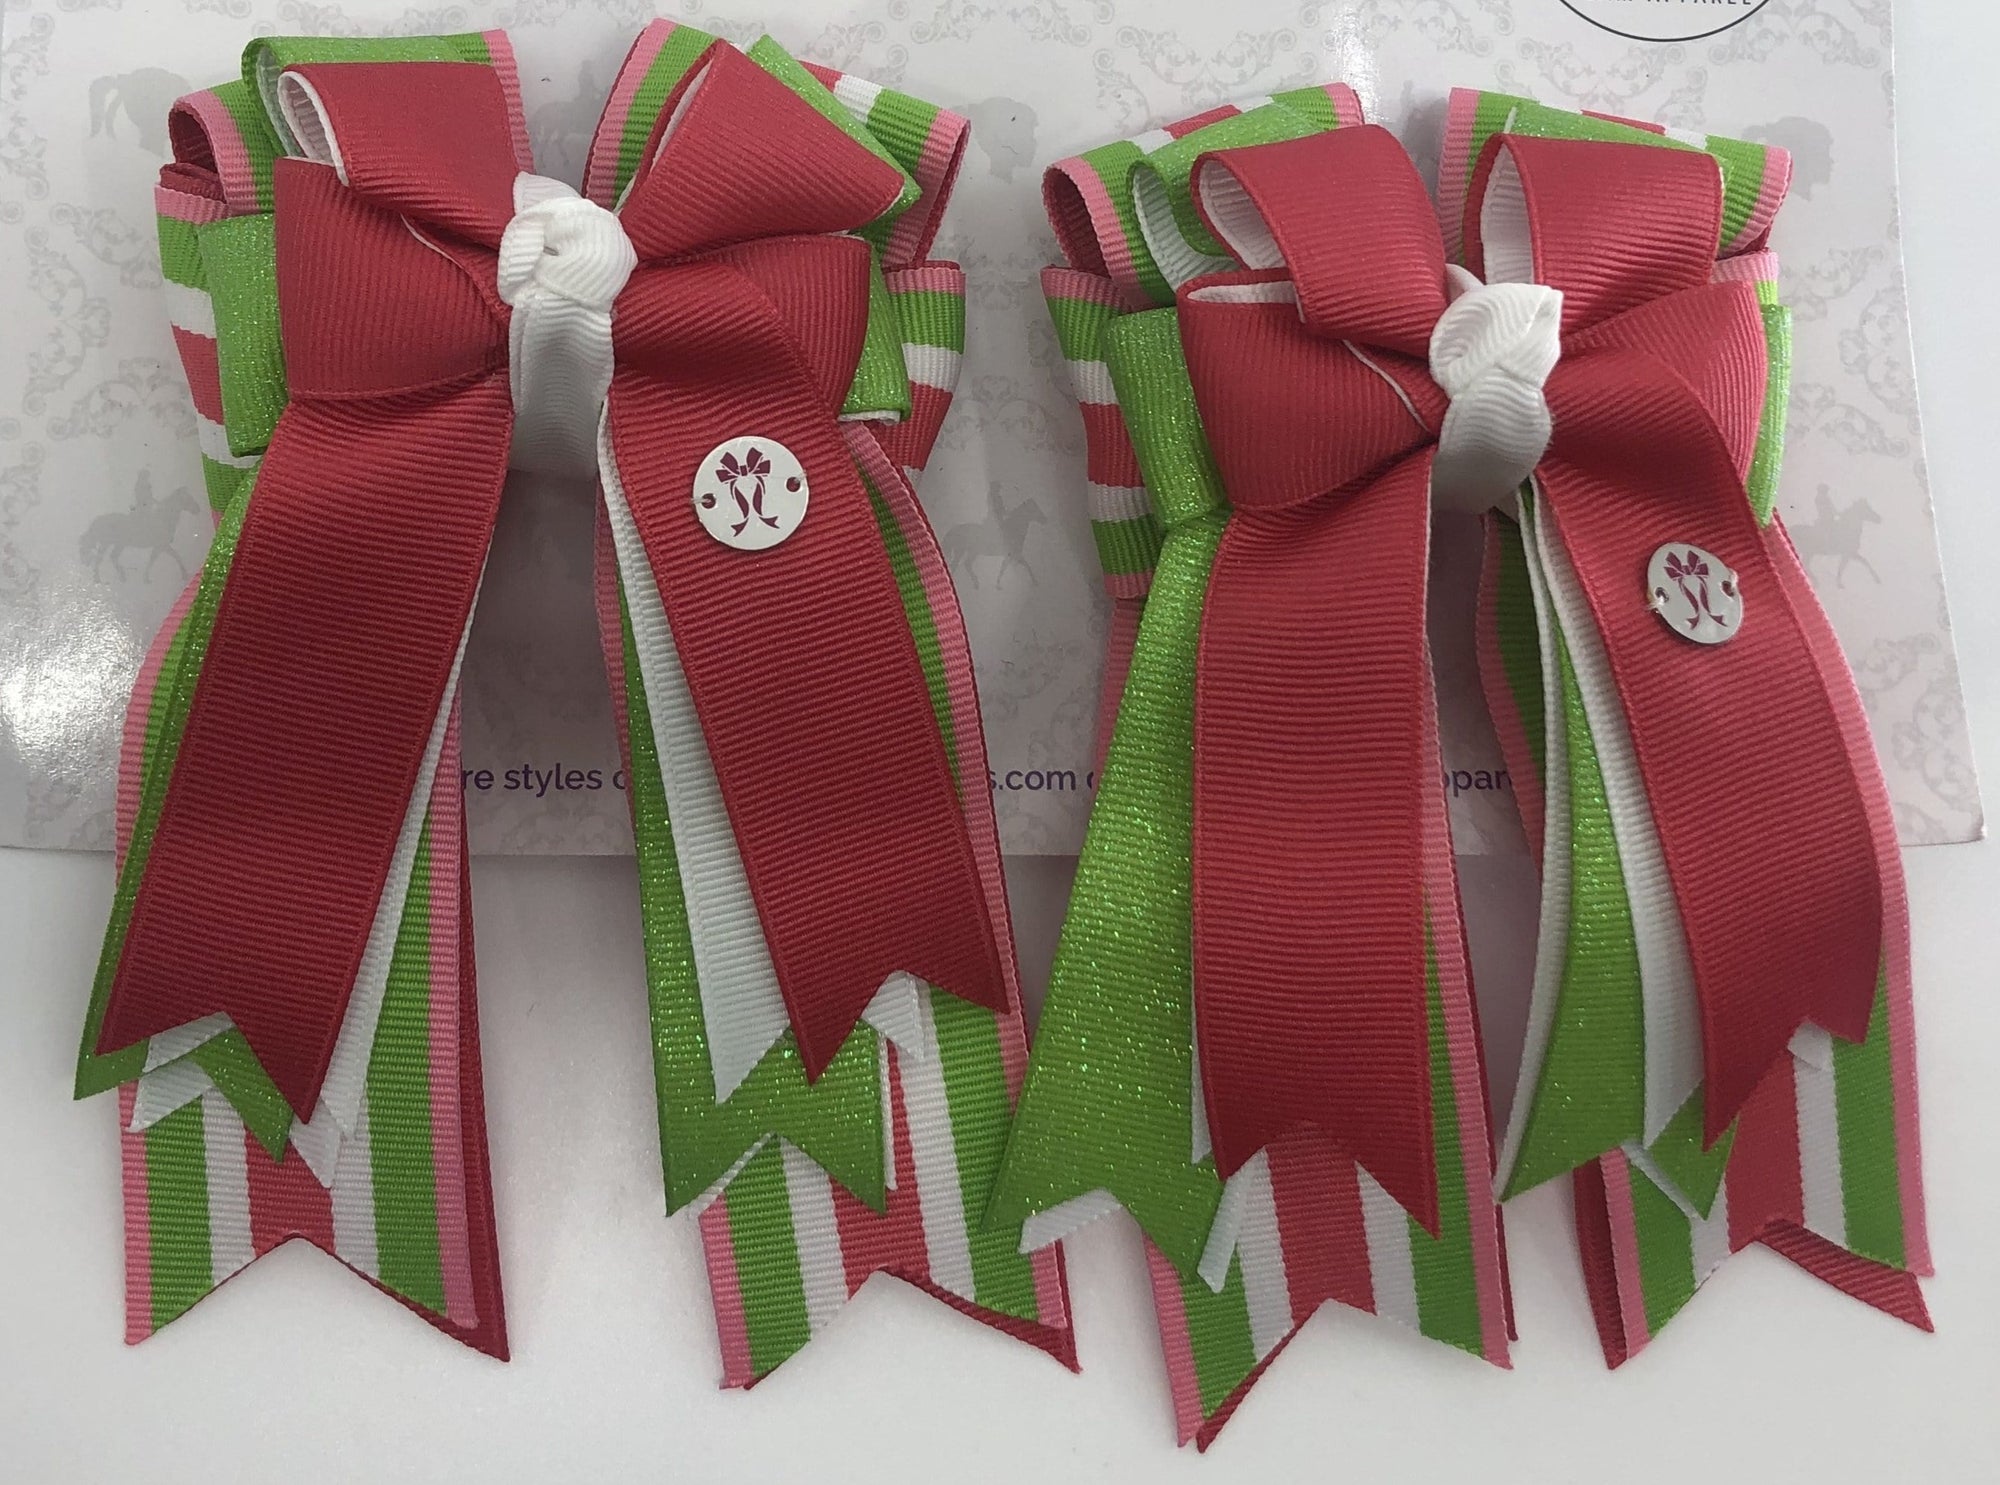 PonyTail Bows 3" Tails Watermelon PonyTail Bows equestrian team apparel online tack store mobile tack store custom farm apparel custom show stable clothing equestrian lifestyle horse show clothing riding clothes PonyTail Bows | Equestrian Hair Accessories horses equestrian tack store